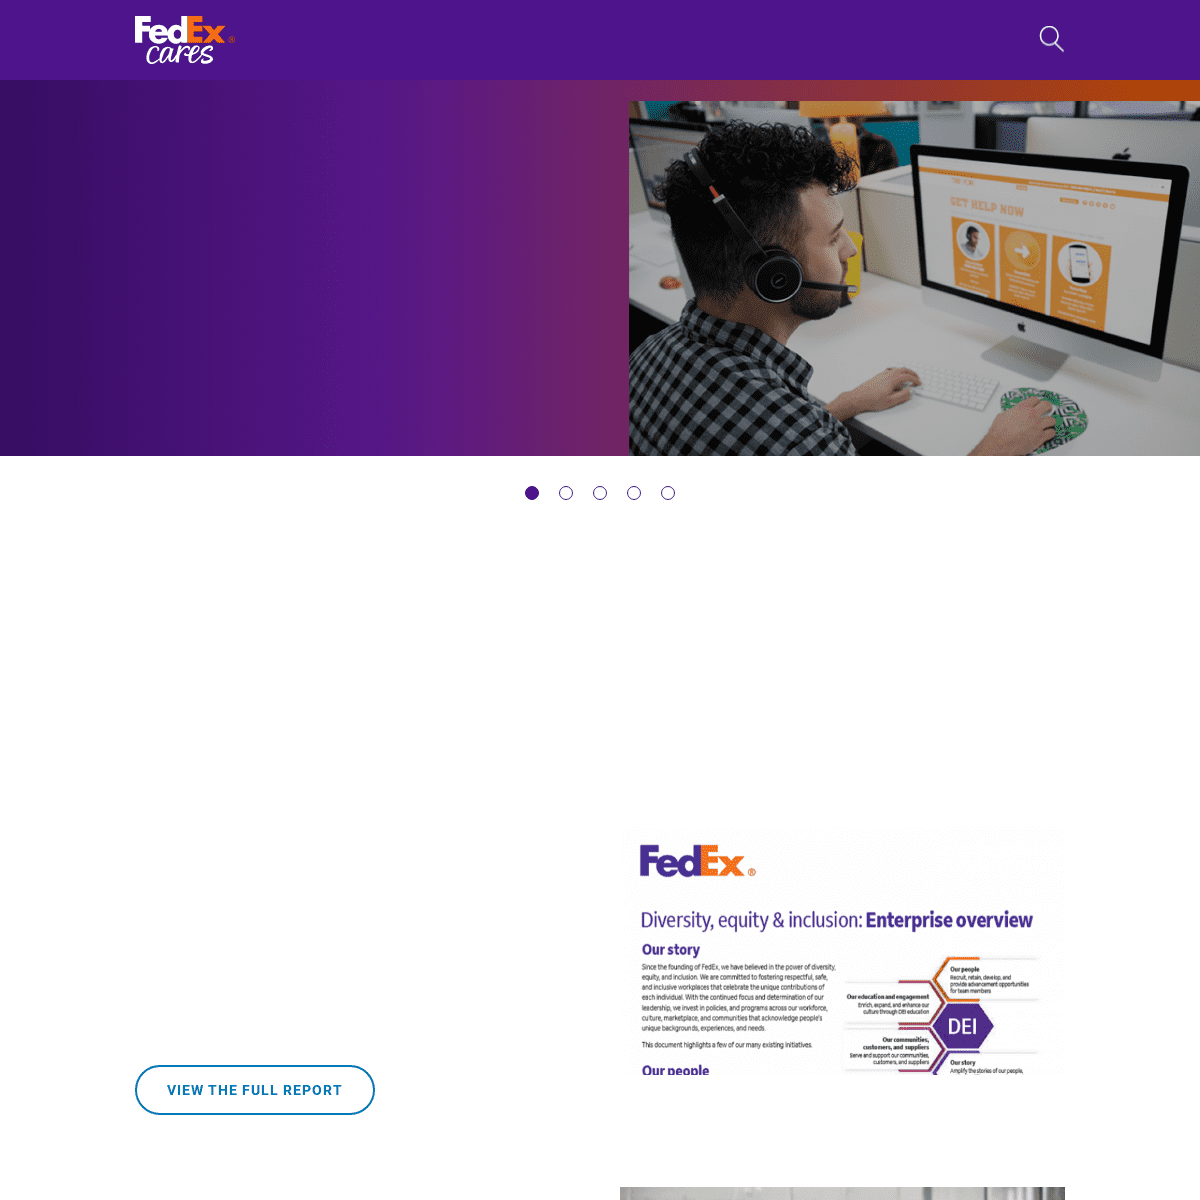 A complete backup of https://fedexcares.com